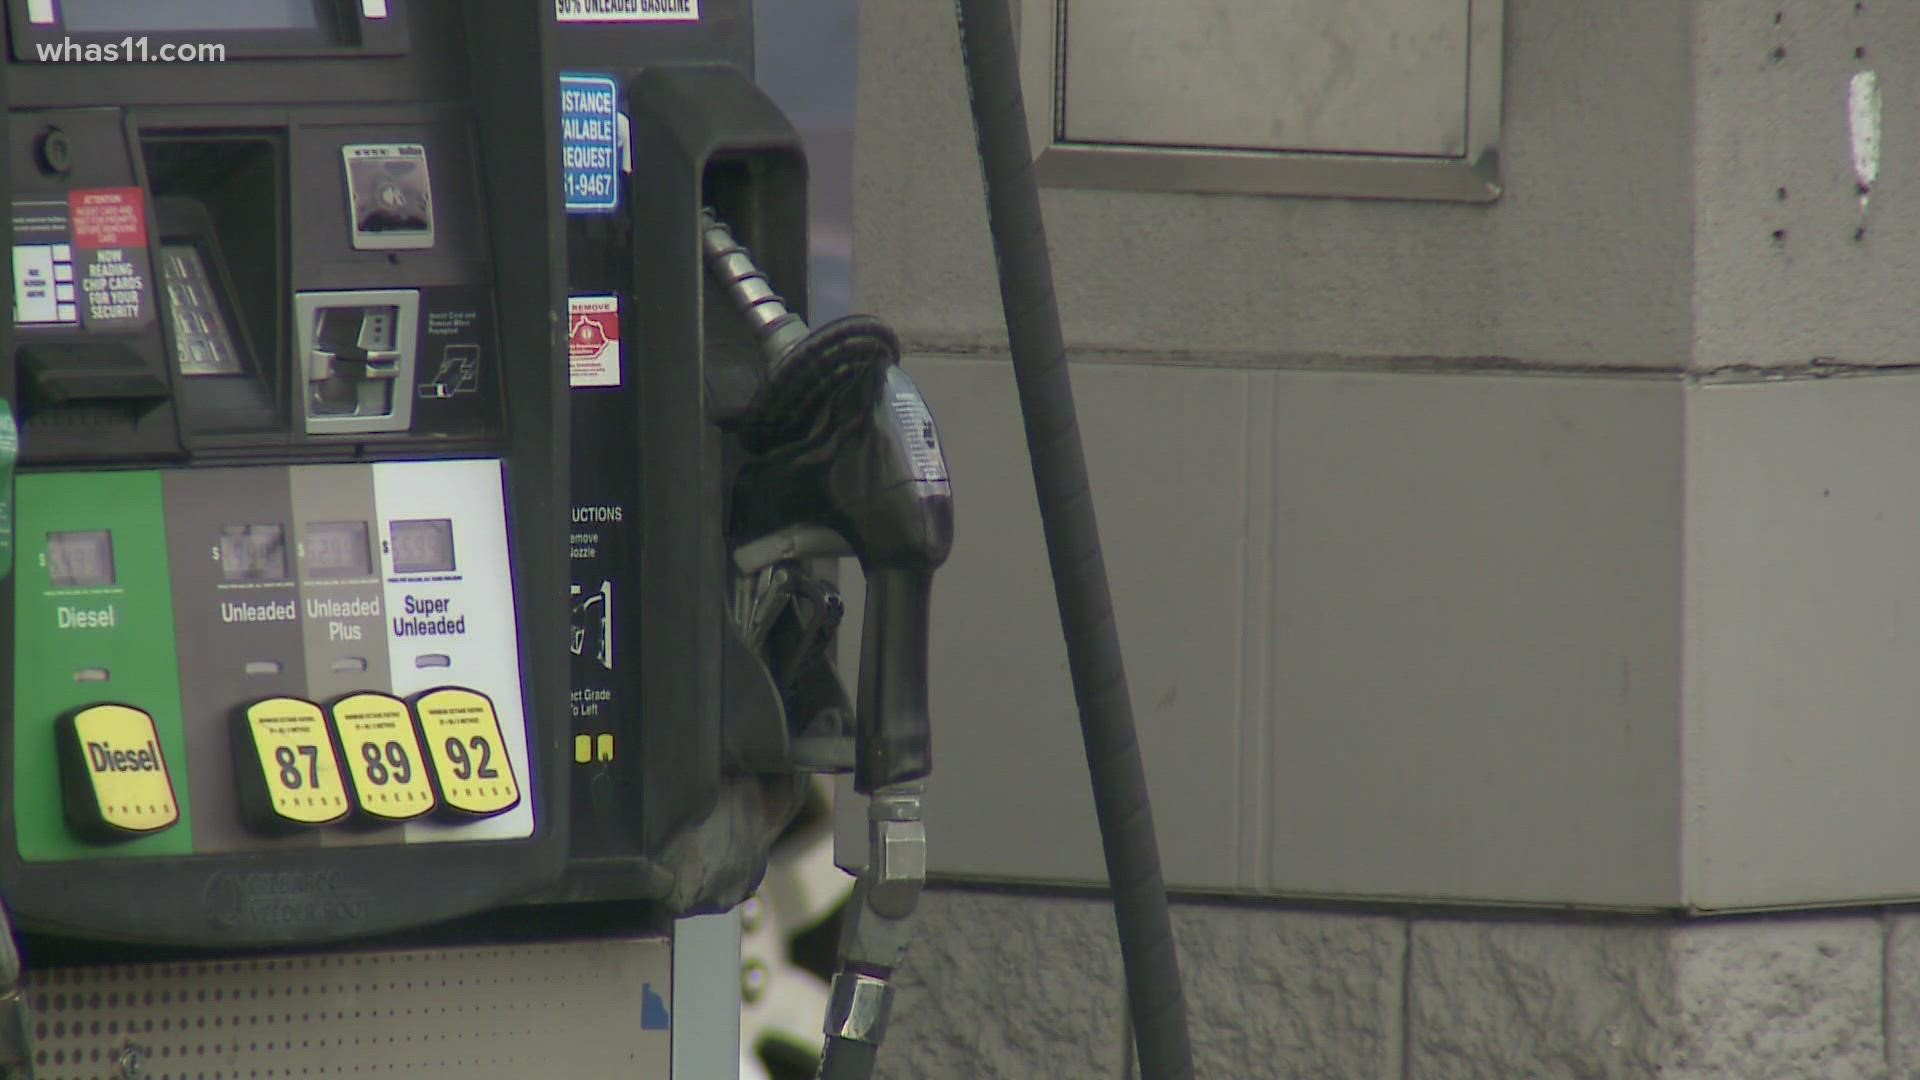 Gov. Andy Beshear says his team is looking into other ways to help but says he could take this action immediately to prevent gas prices from rising further.